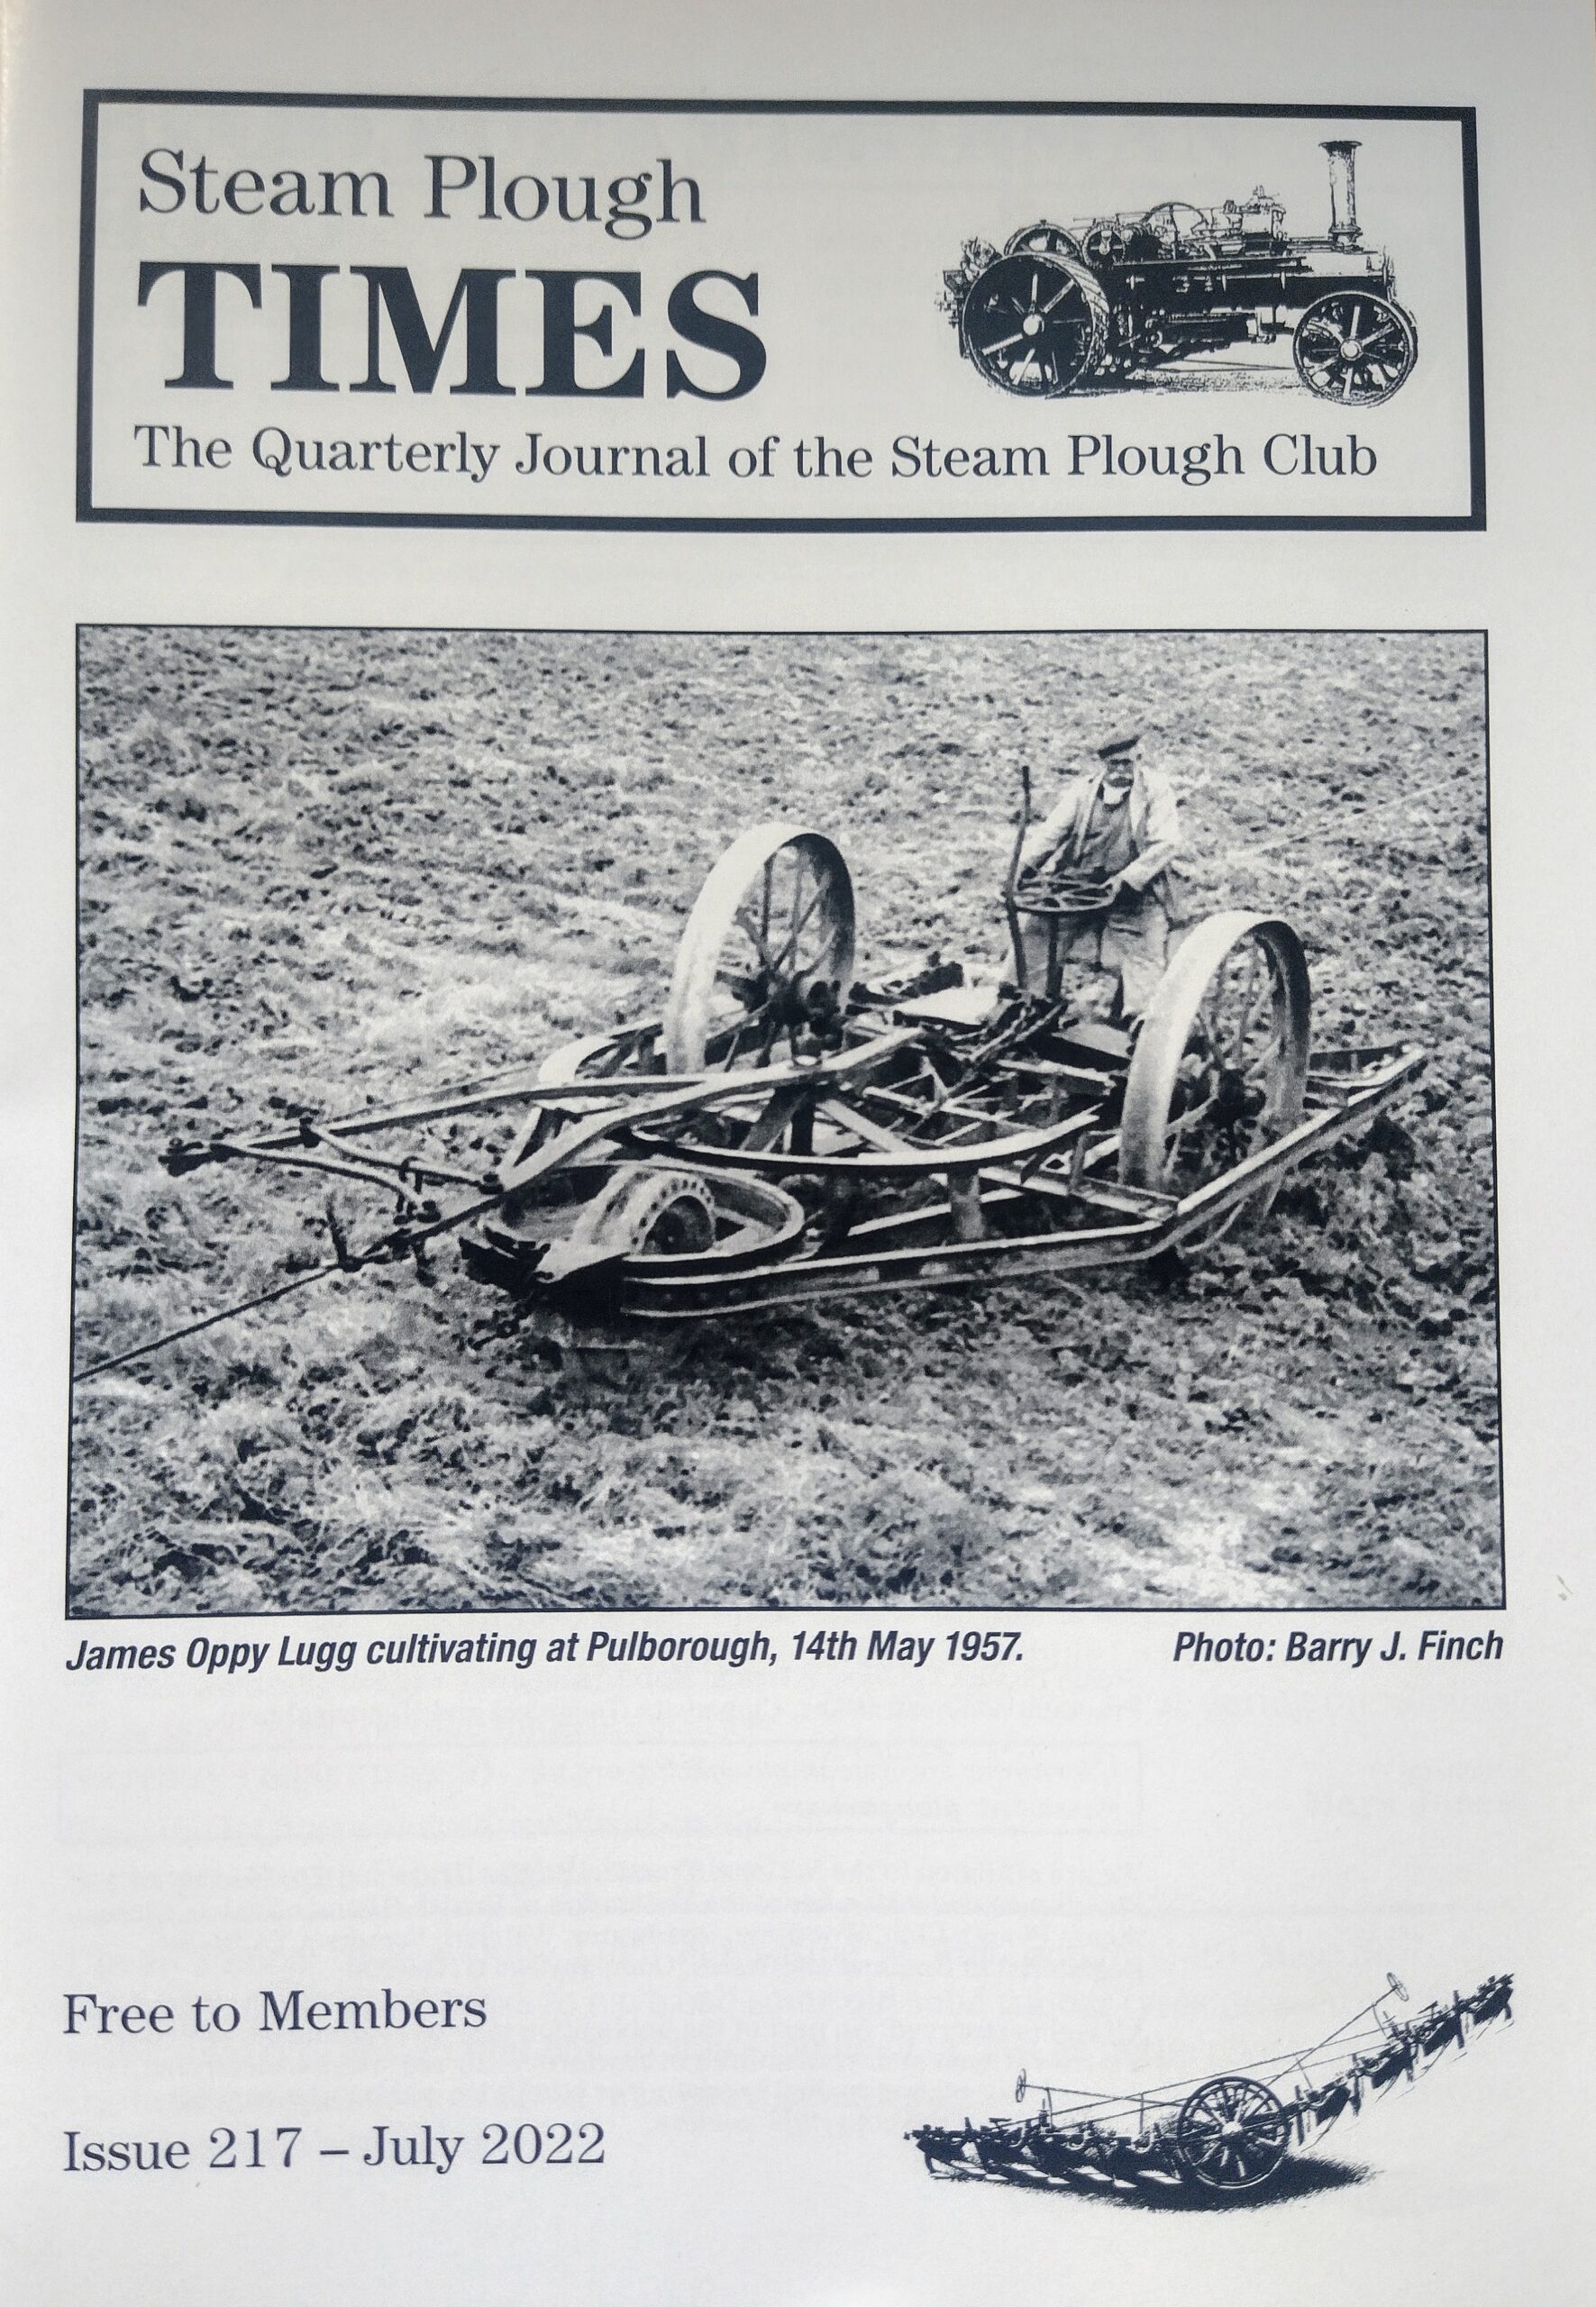 JOIN THE STEAM PLOUGH CLUB